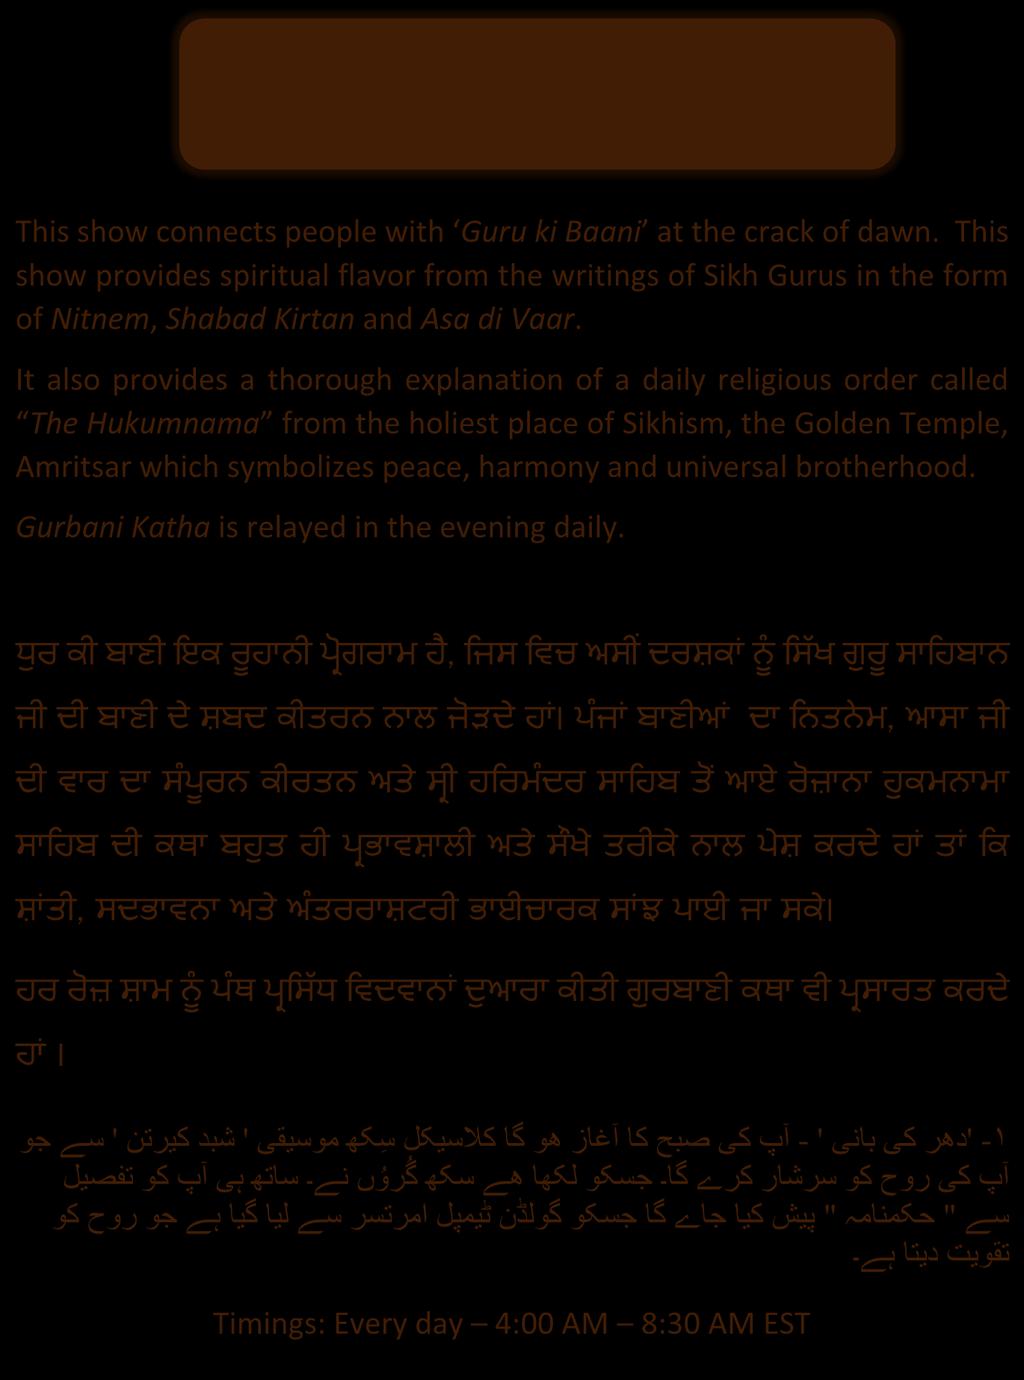 brotherhood. Gurbani Katha is relayed in the evening daily.